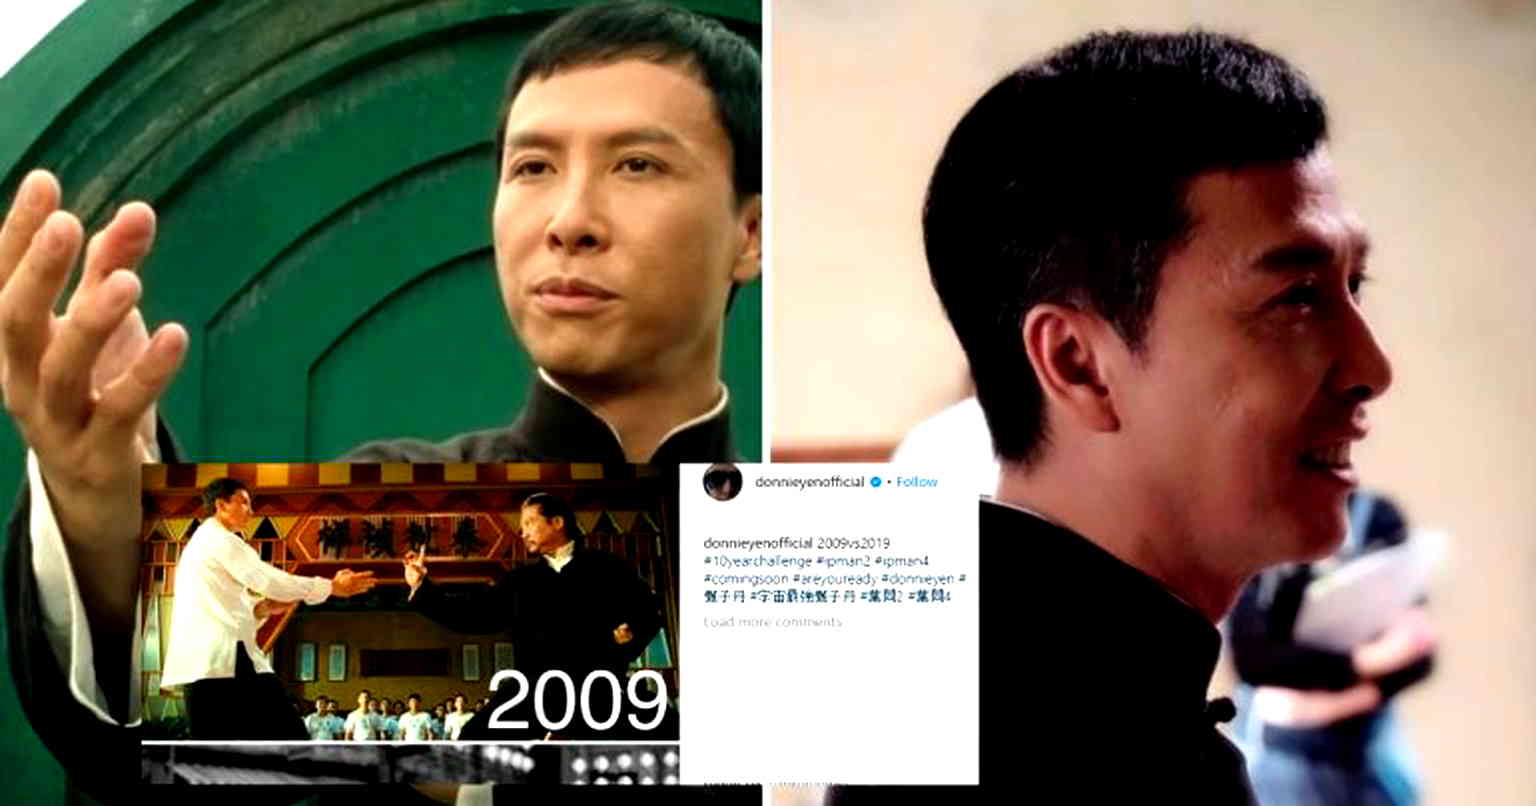 Donnie Yen Teases ‘Ip Man 4’ With #10YearChallenge Post on Instagaram